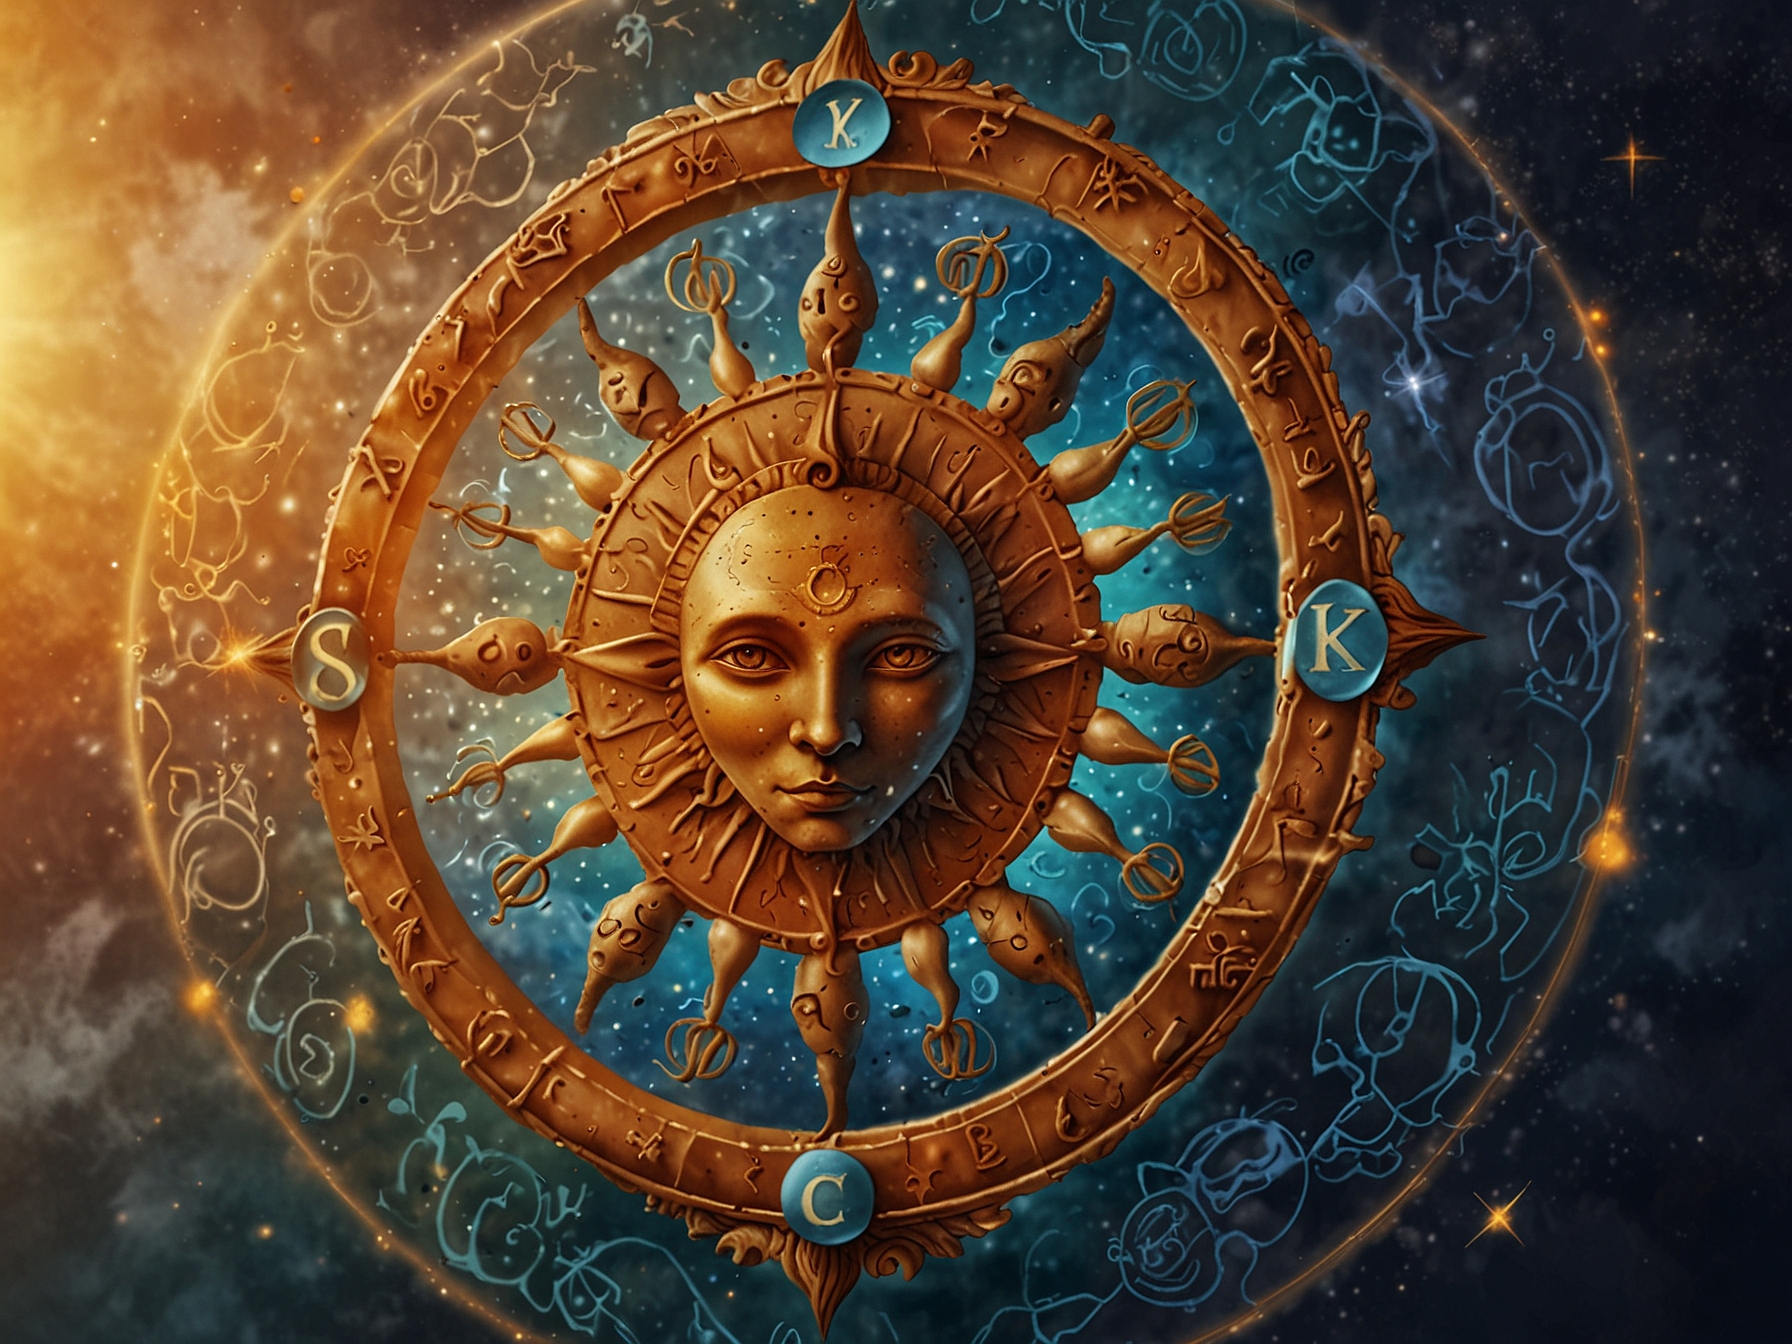 An illustration showing the zodiac wheel with the Sun entering Cancer, symbolizing the start of Cancer season and highlighting the transformative energies influencing each sign.